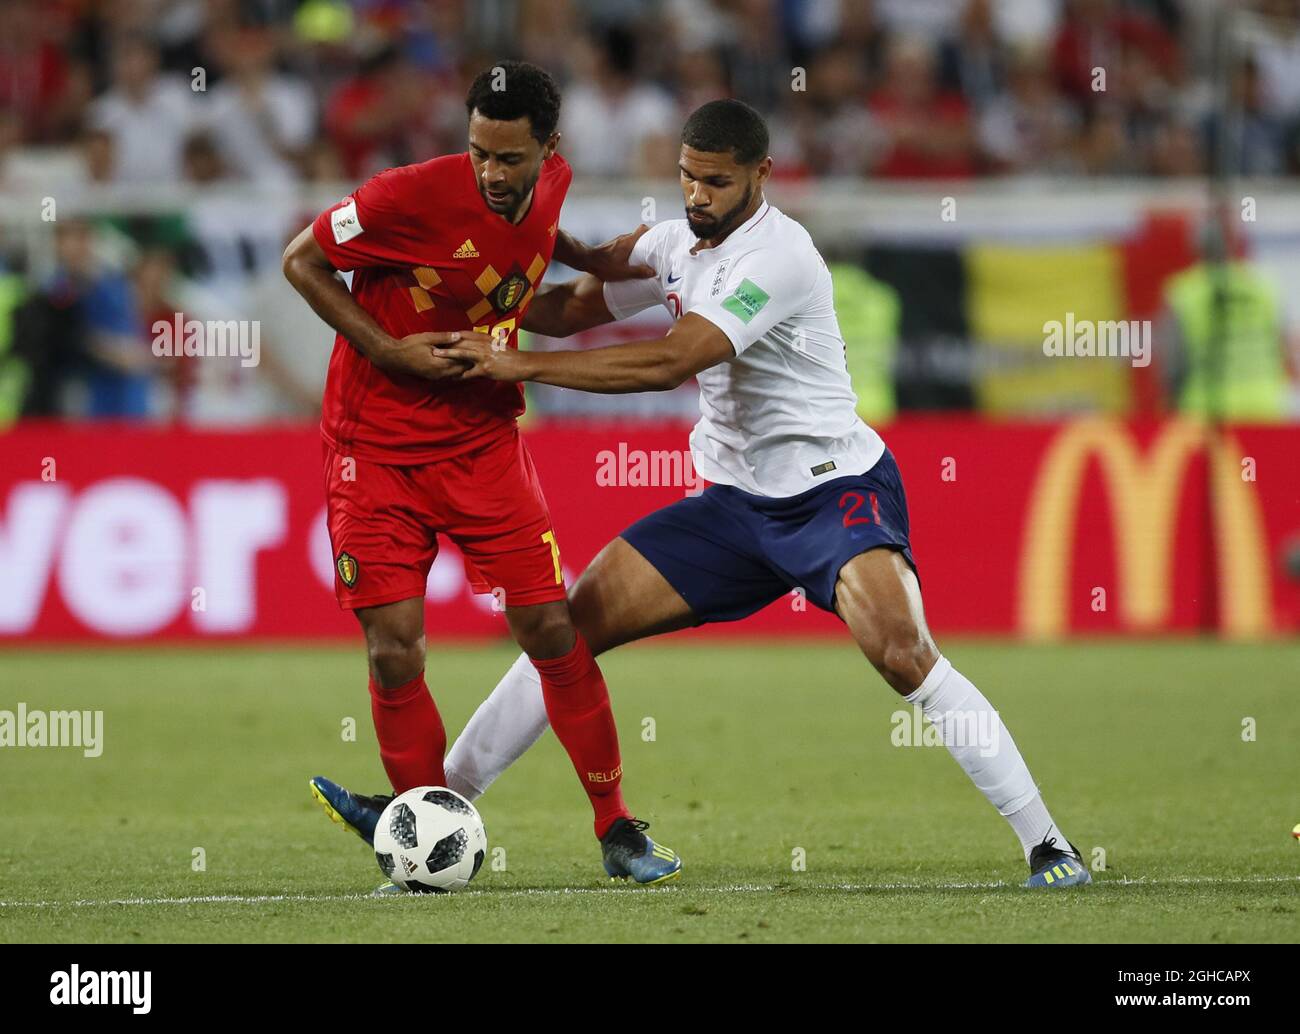 Moussa Dembele of Belgium tackled by Ruben Loftus-Cheek of England  during the FIFA World Cup 2018 Group G match at the Kaliningrad Stadium, Kaliningrad. Picture date 28th June 2018. Picture credit should read: David Klein/Sportimage via PA Images Stock Photo